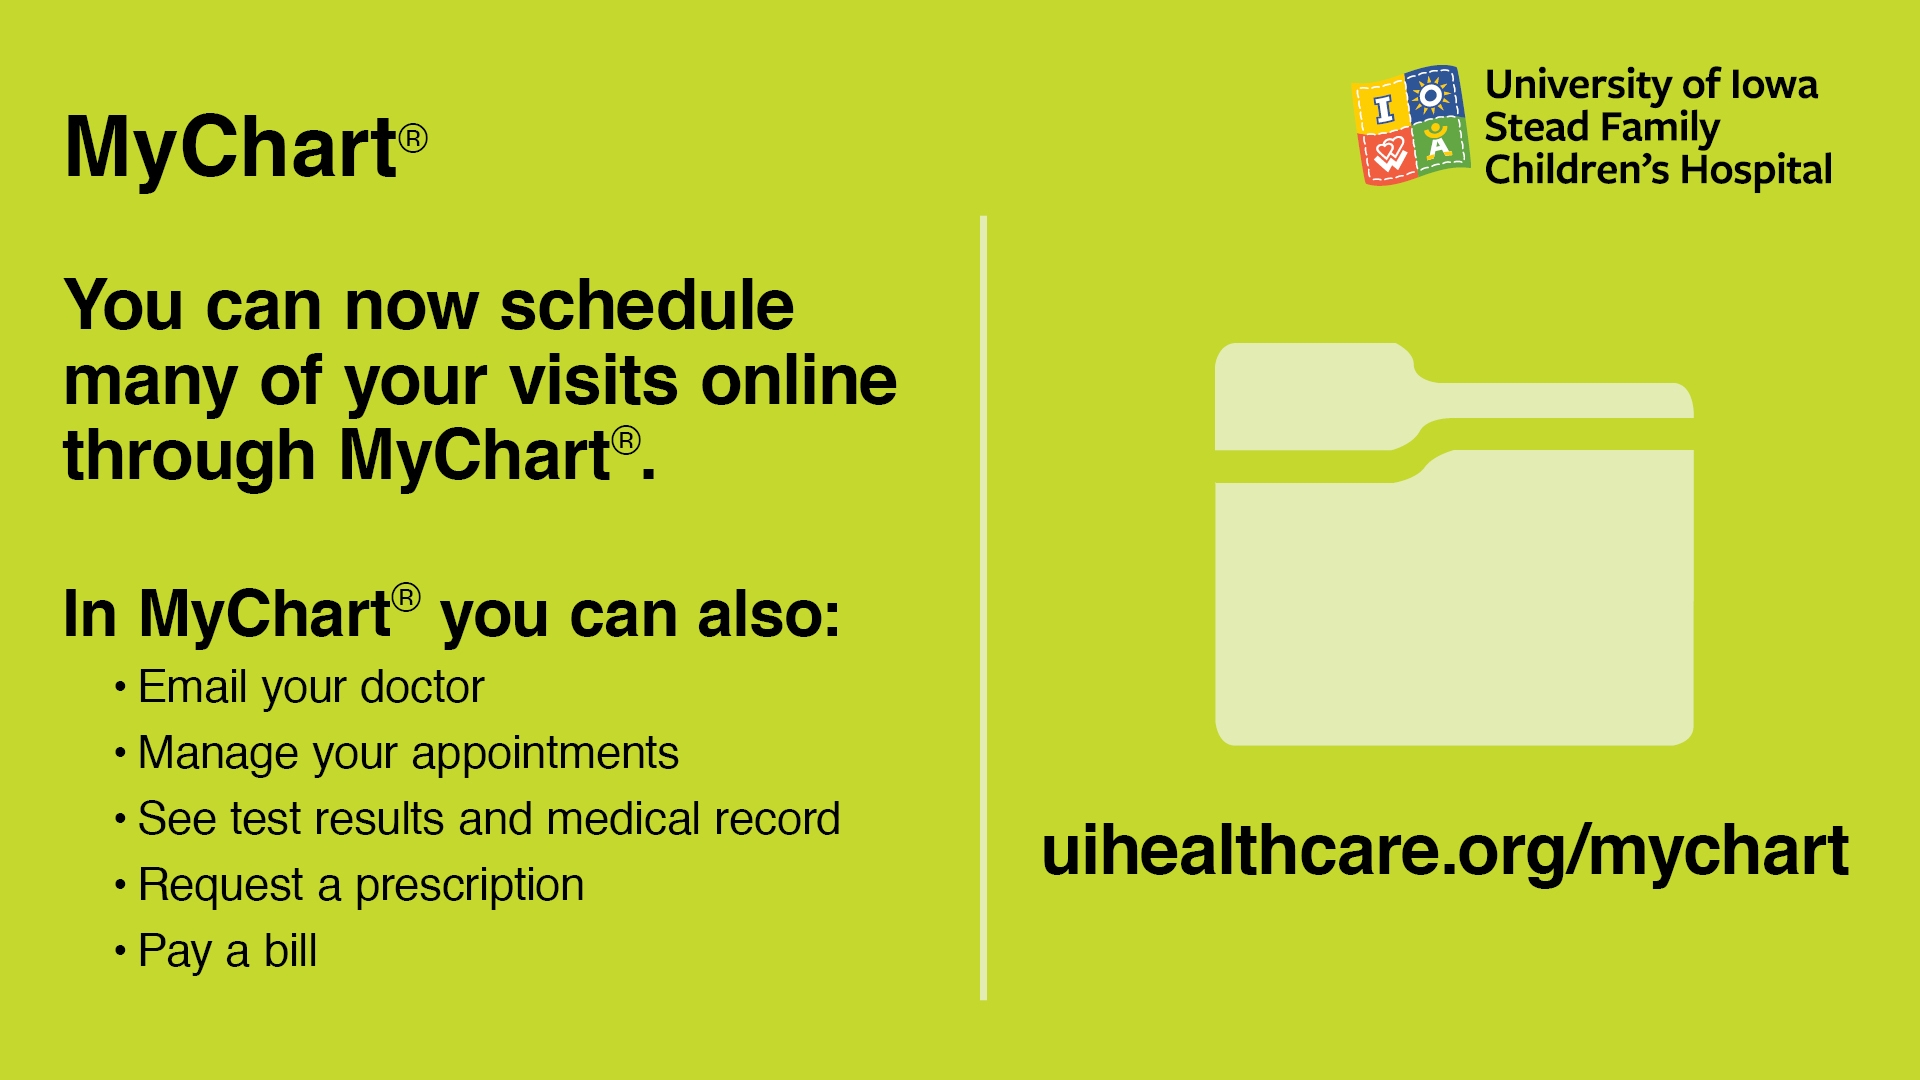 You can now schedule many of your visits online through MyChart. UIhealthcare.org/mychart